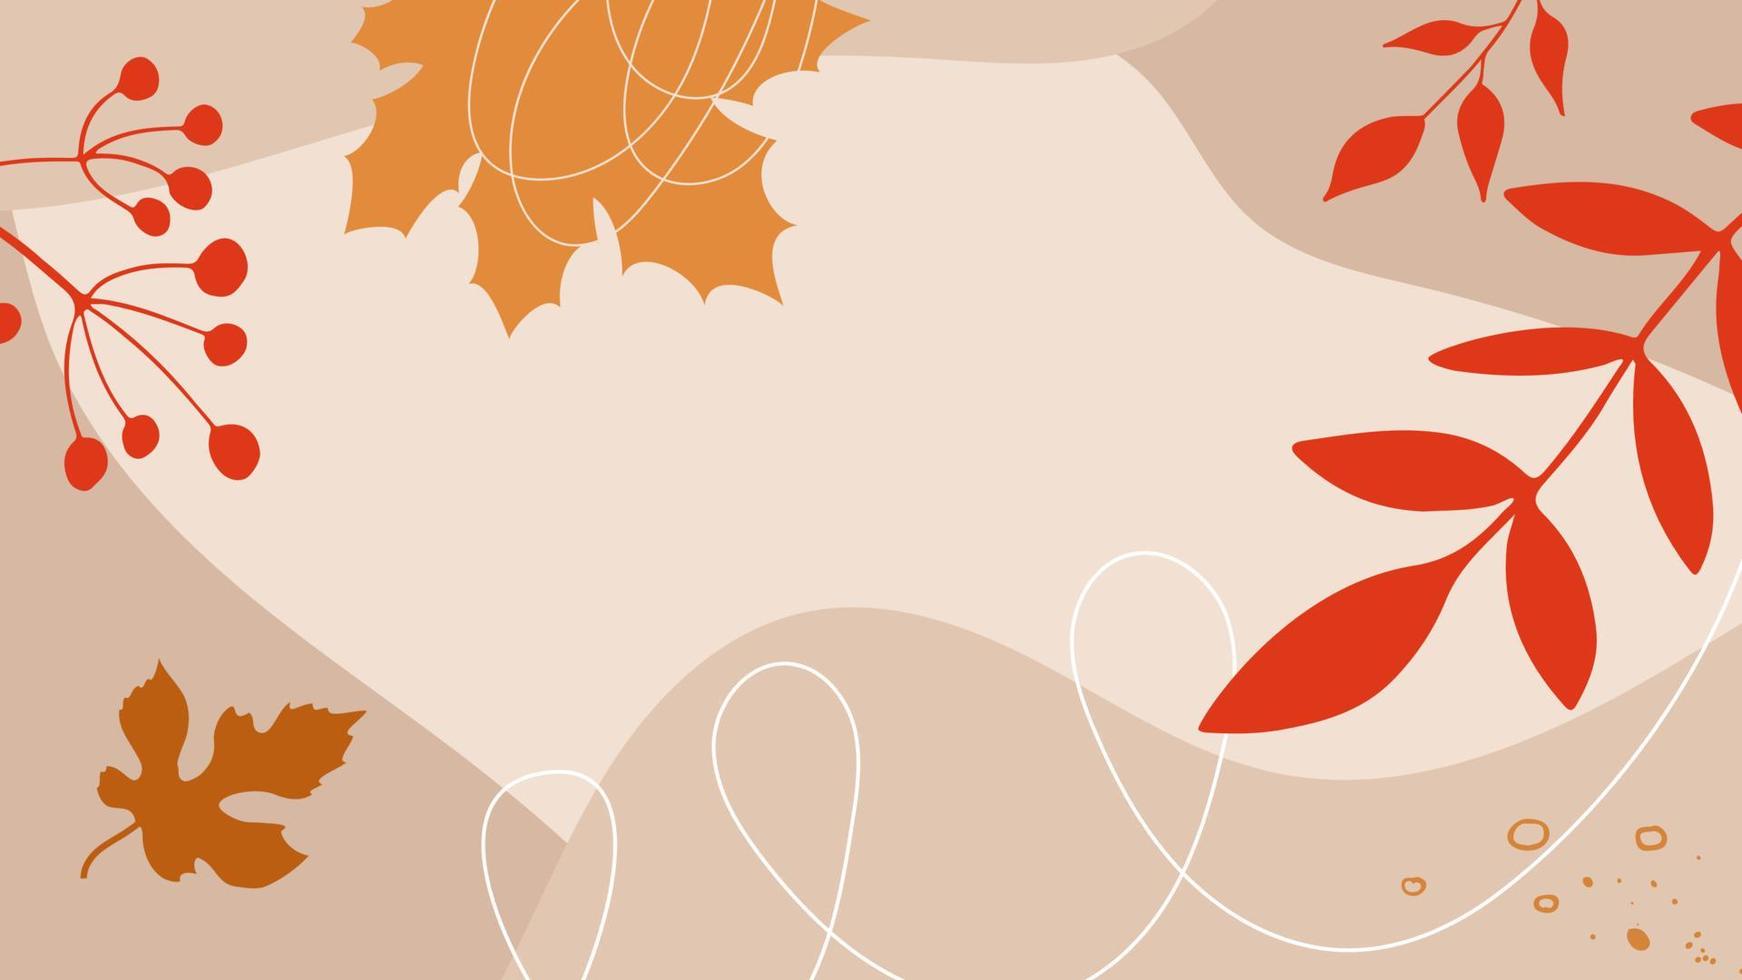 Autumn sale digital poster, promotional banner with autumn leaves,berries,abstract shapes. Vector illustration